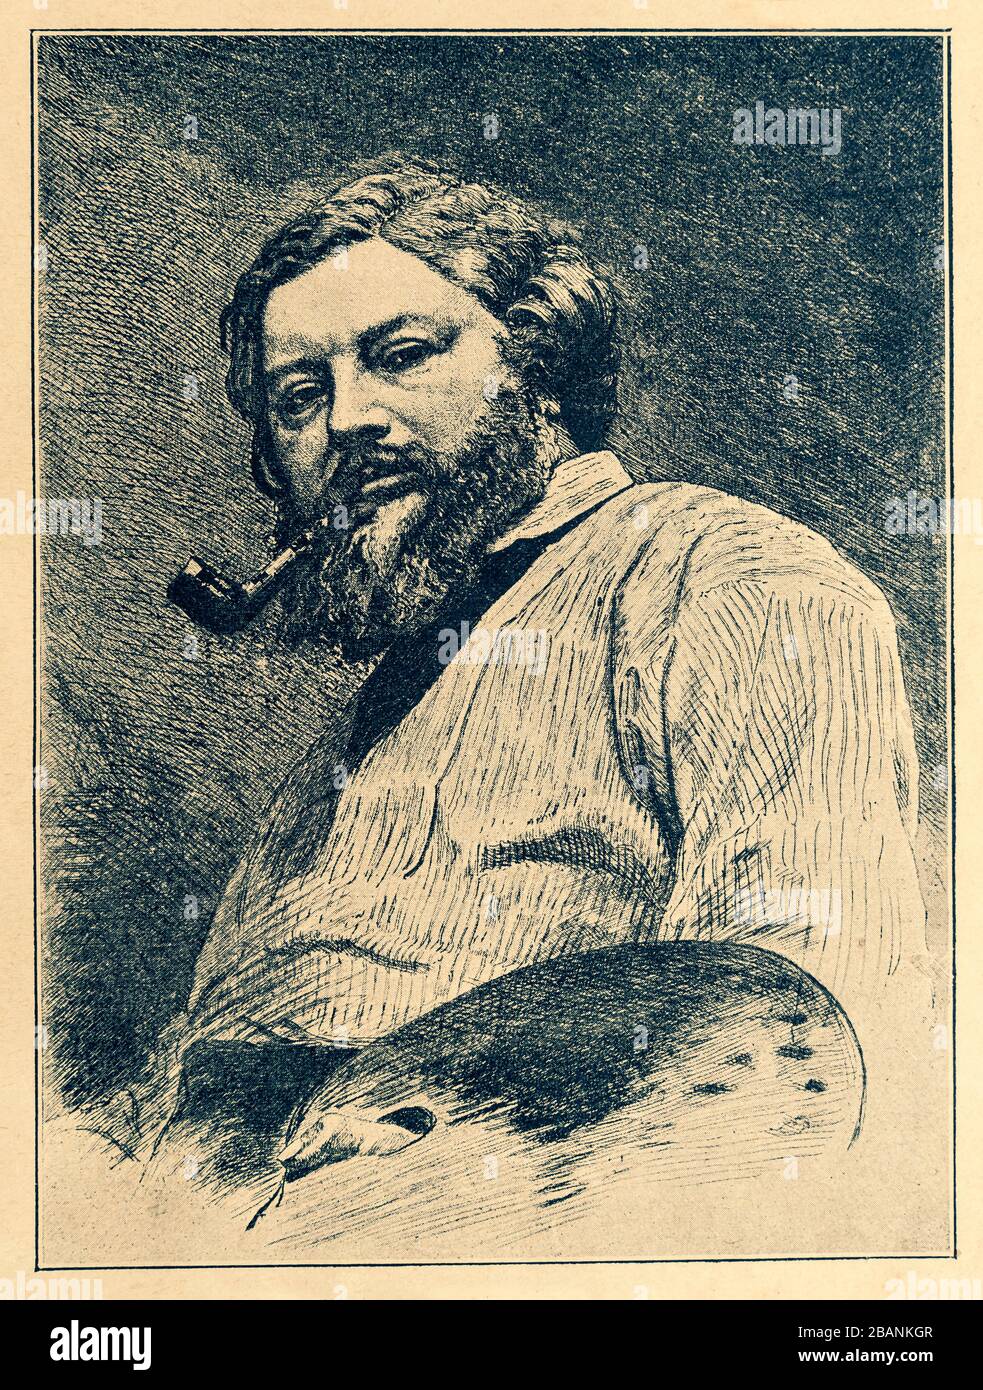 Gustave Courbet,  Self Portrait. Digital improved reproduction from Illustrated overview of the life of mankind in the 19th century, 1901 edition, Marx publishing house, St. Petersburg Stock Photo